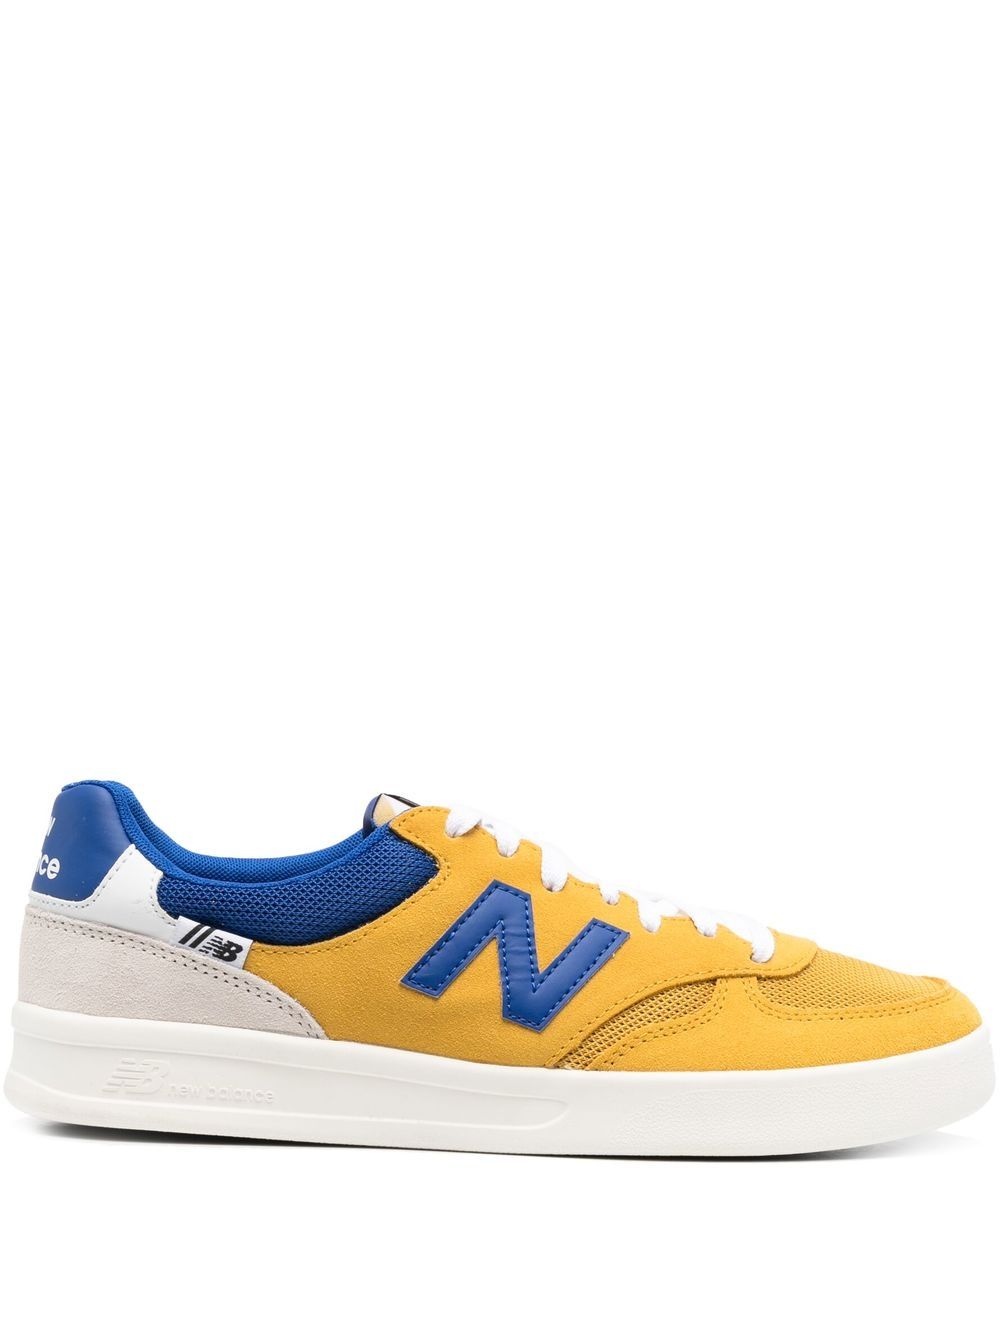 New Balance low-top lace-up sneakers - Yellow